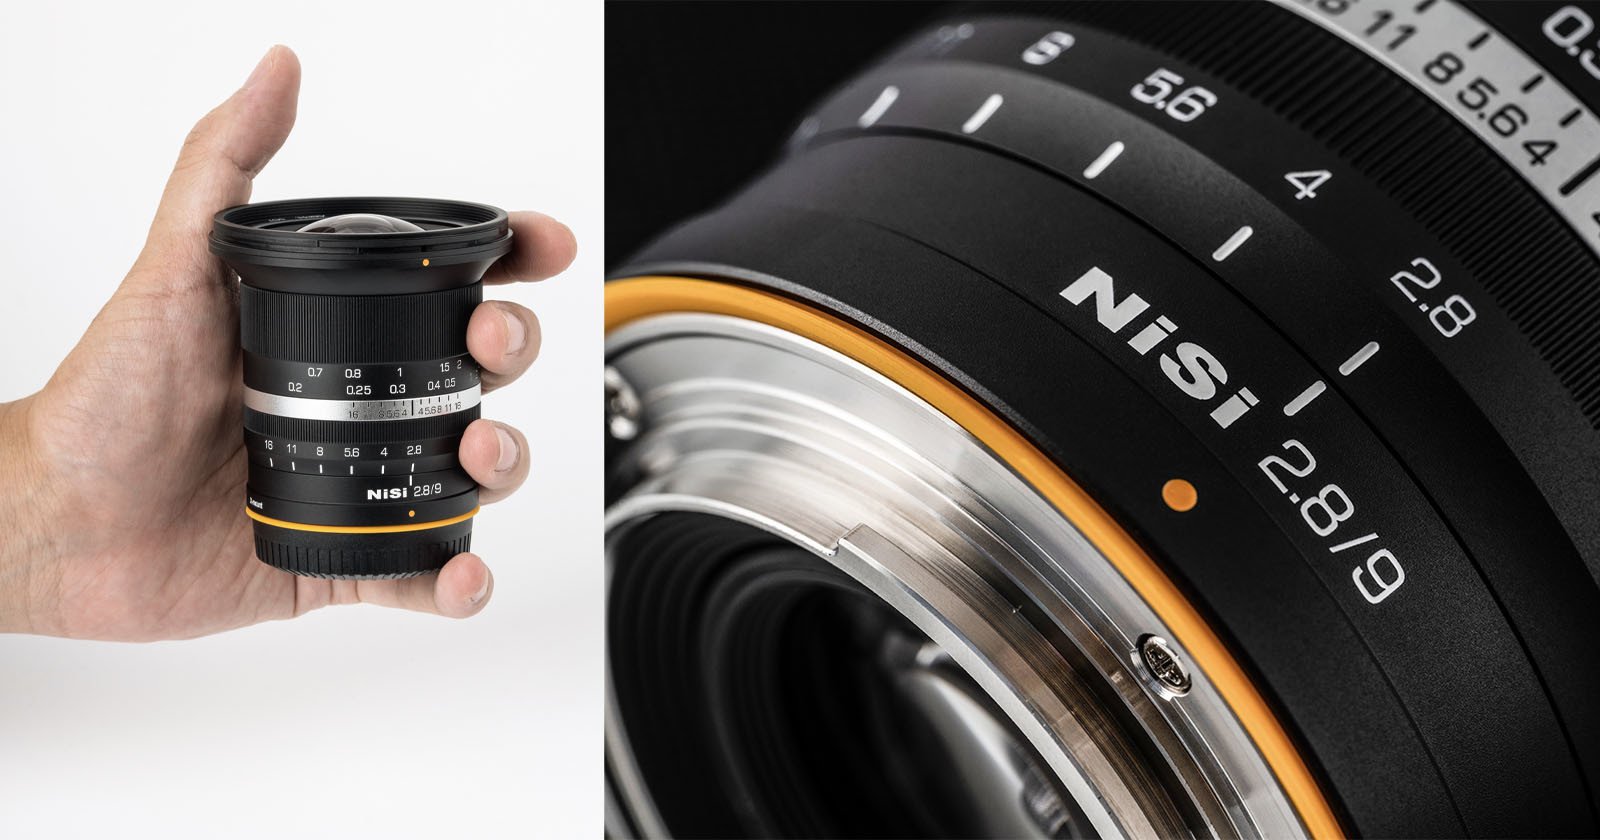 NiSis Second-Ever Lens is a $450 9mm f/2.8 for APS-C Cameras